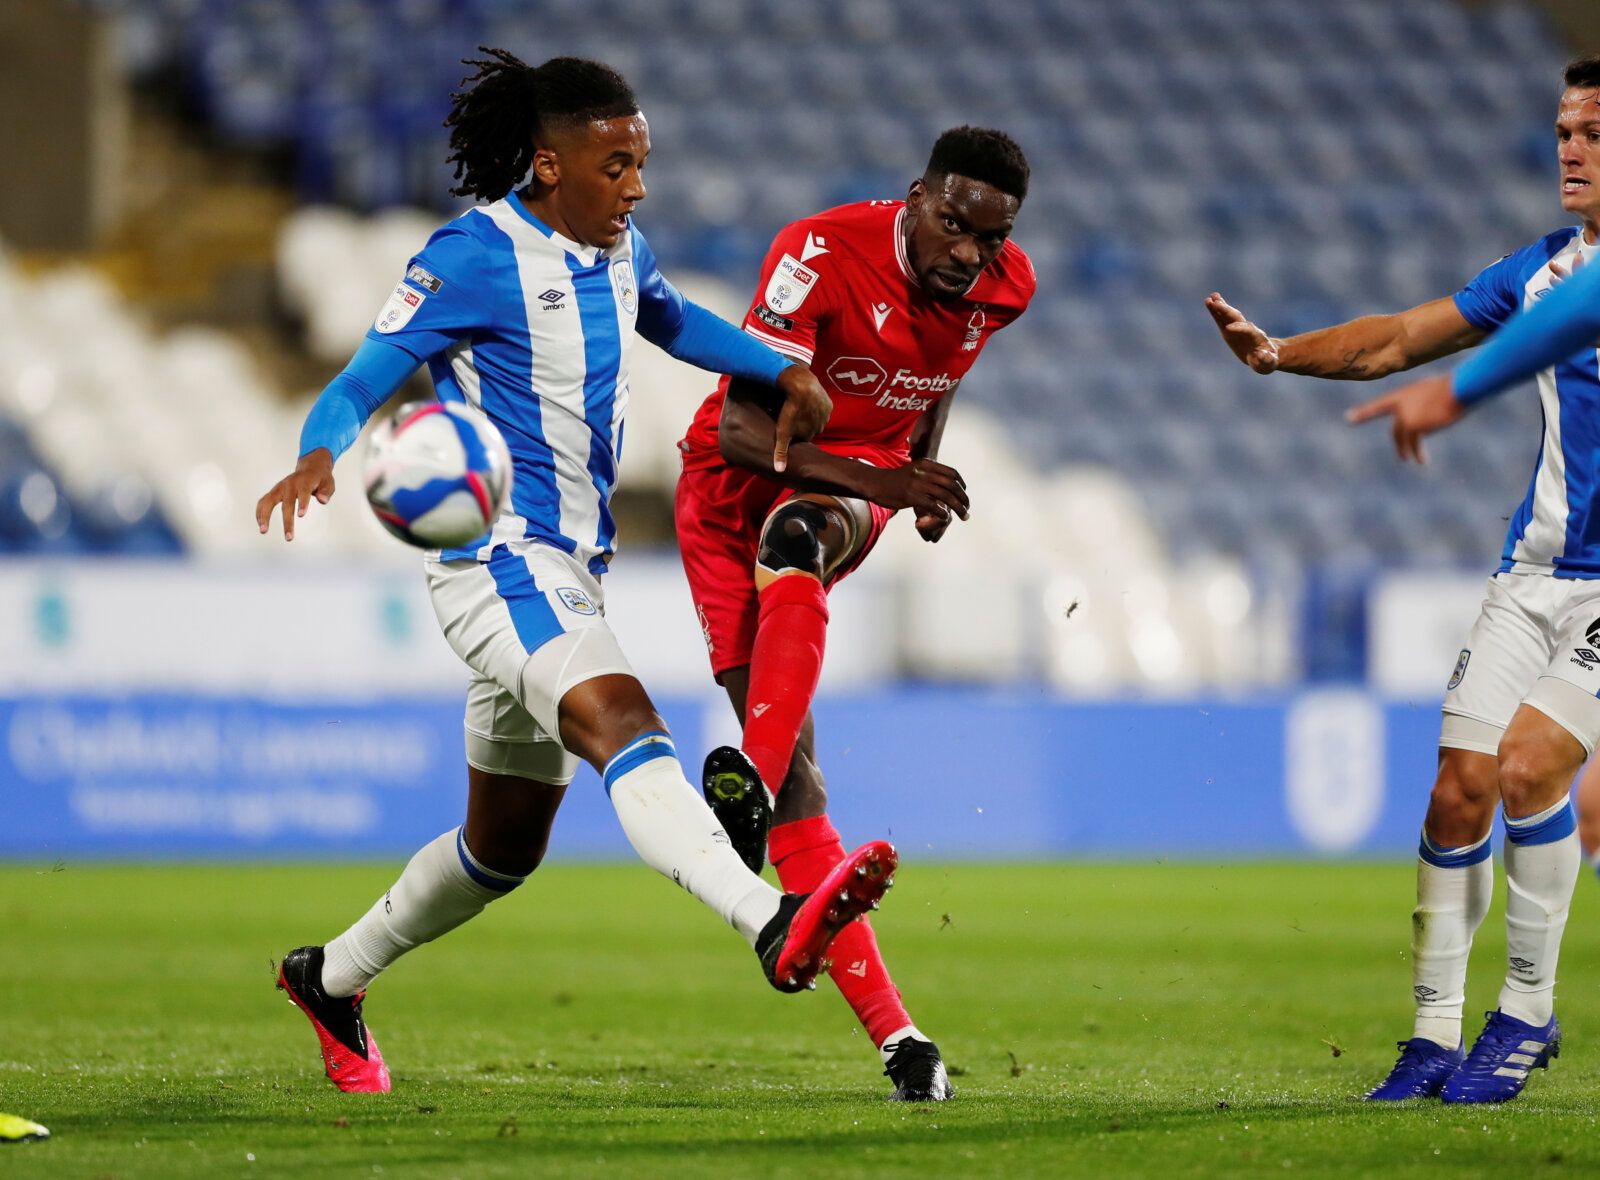 Soccer Football - Championship - Huddersfield Town v Nottingham Forest - John Smith's Stadium, Huddersfield, Britain - September 25, 2020   Nottingham Forests' Sammy Ameobi in action with Huddersfield Towns' Romoney Crichlow-Noble   Action Images/Lee Smith    EDITORIAL USE ONLY. No use with unauthorized audio, video, data, fixture lists, club/league logos or 